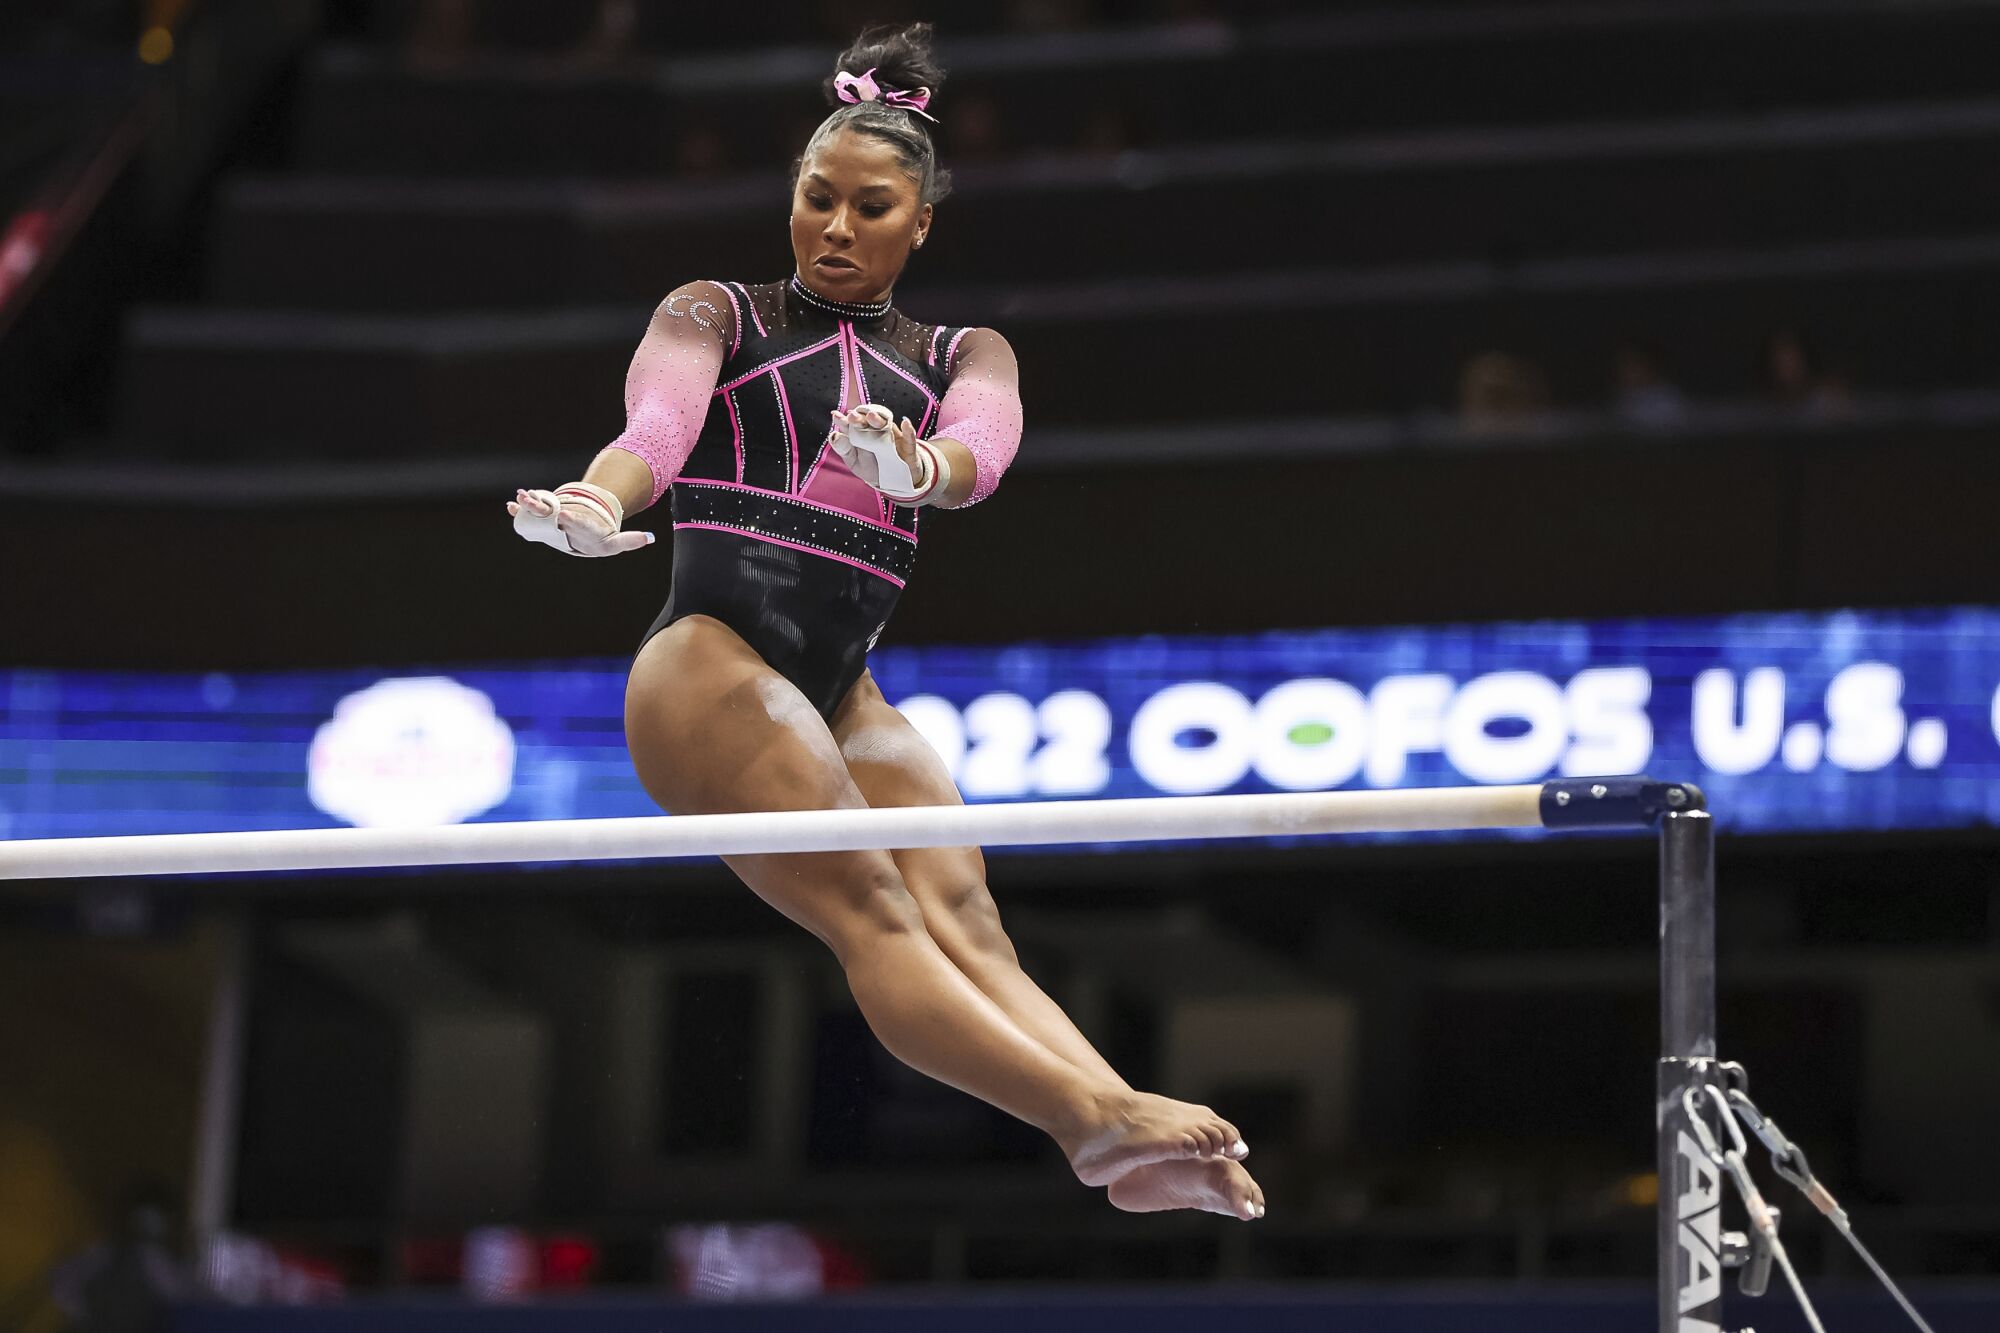 Jordan Chiles competes on the uneven bars at the US Gymnastics Championships in August.